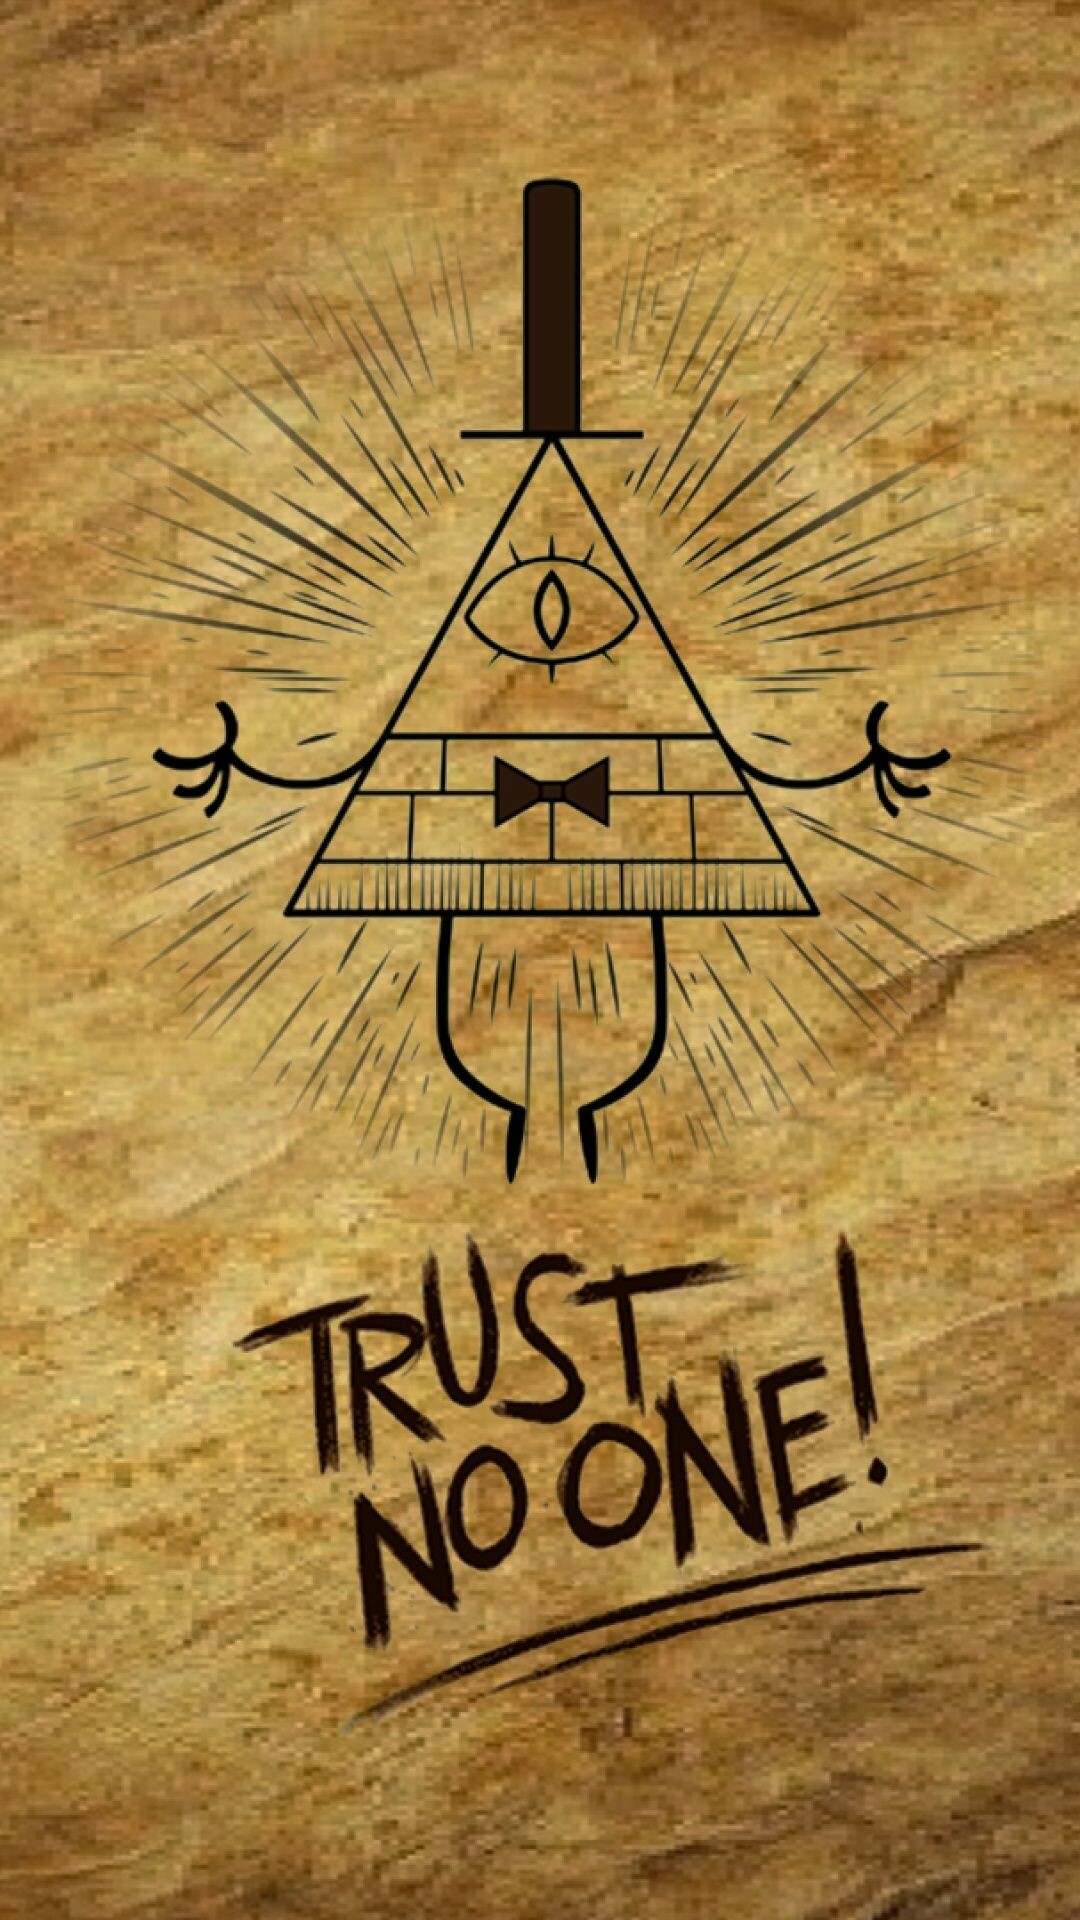 Gravity Falls: Bill Cipher, Trust no one, The main antagonist of the series. 1080x1920 Full HD Wallpaper.